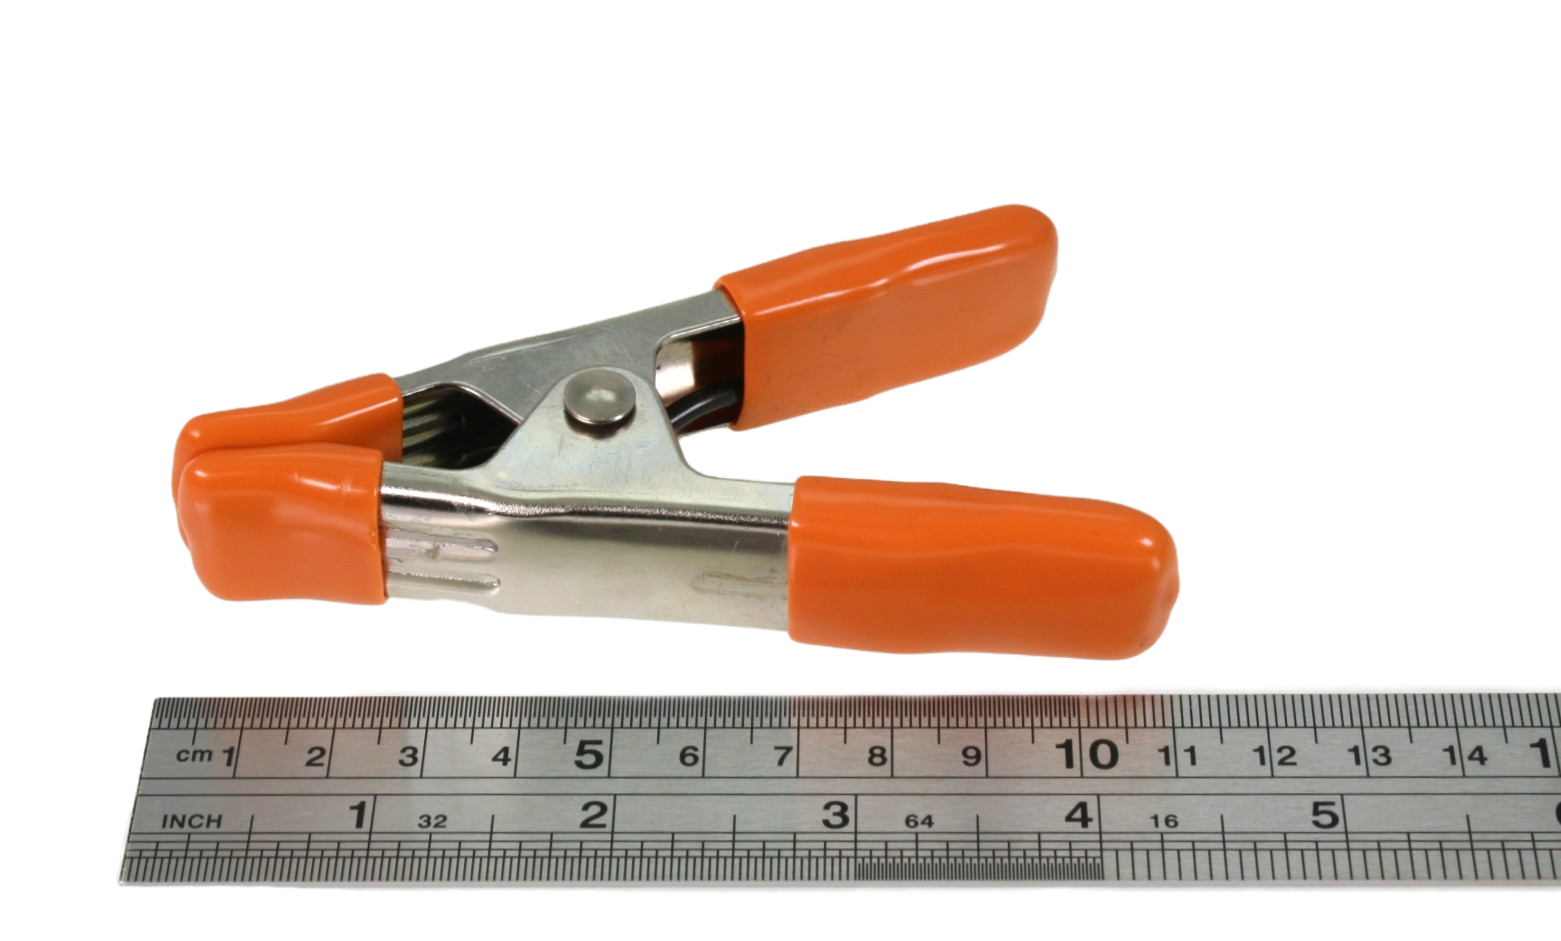 25mm clamp next to a ruler